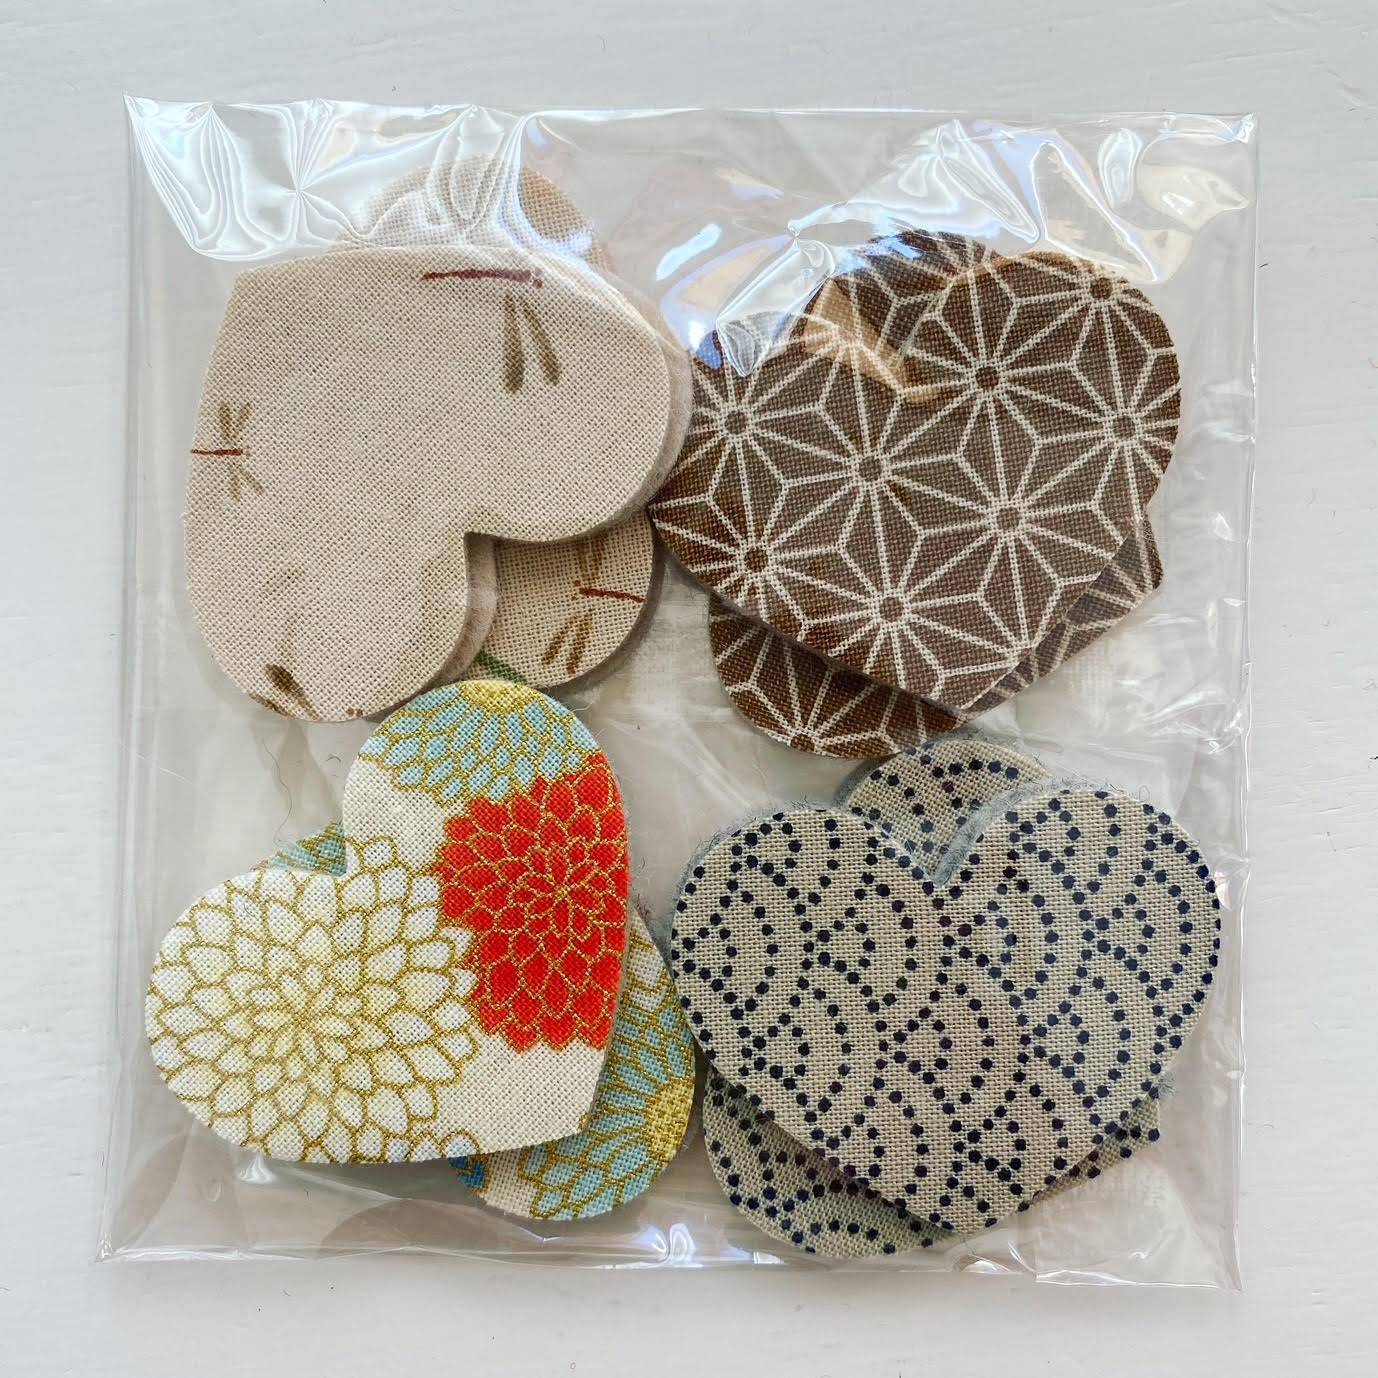 LIMITED EDITION Fabric Pre-Cut Hearts